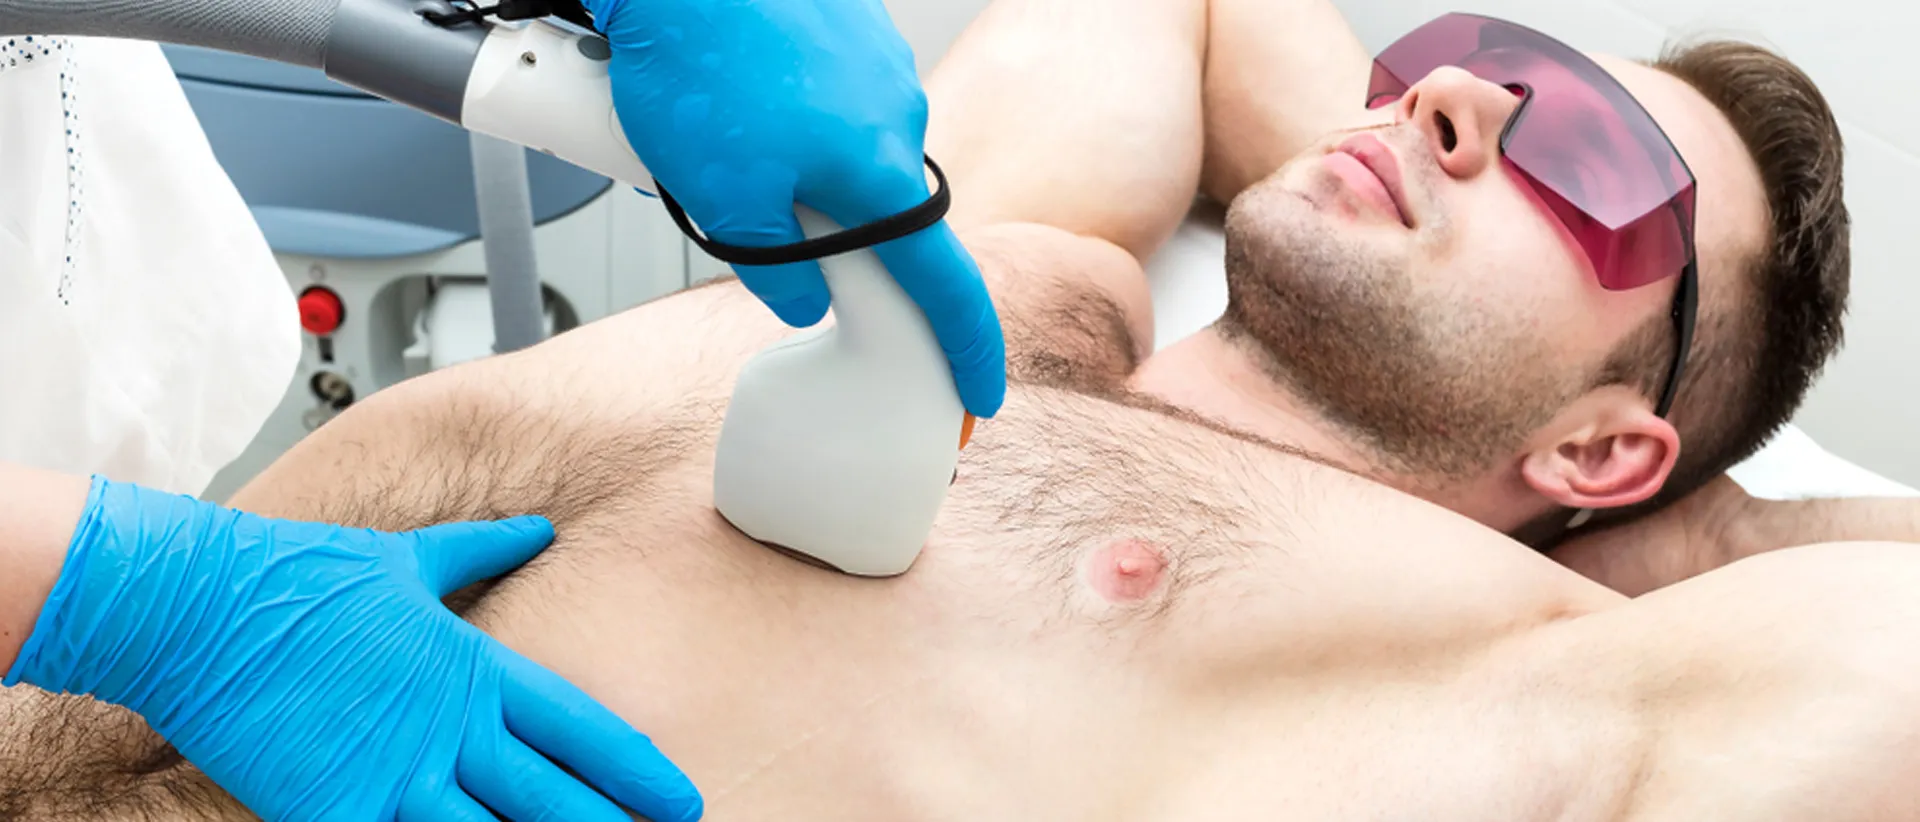 Man getting chest hair removed through laser hair removal service
               